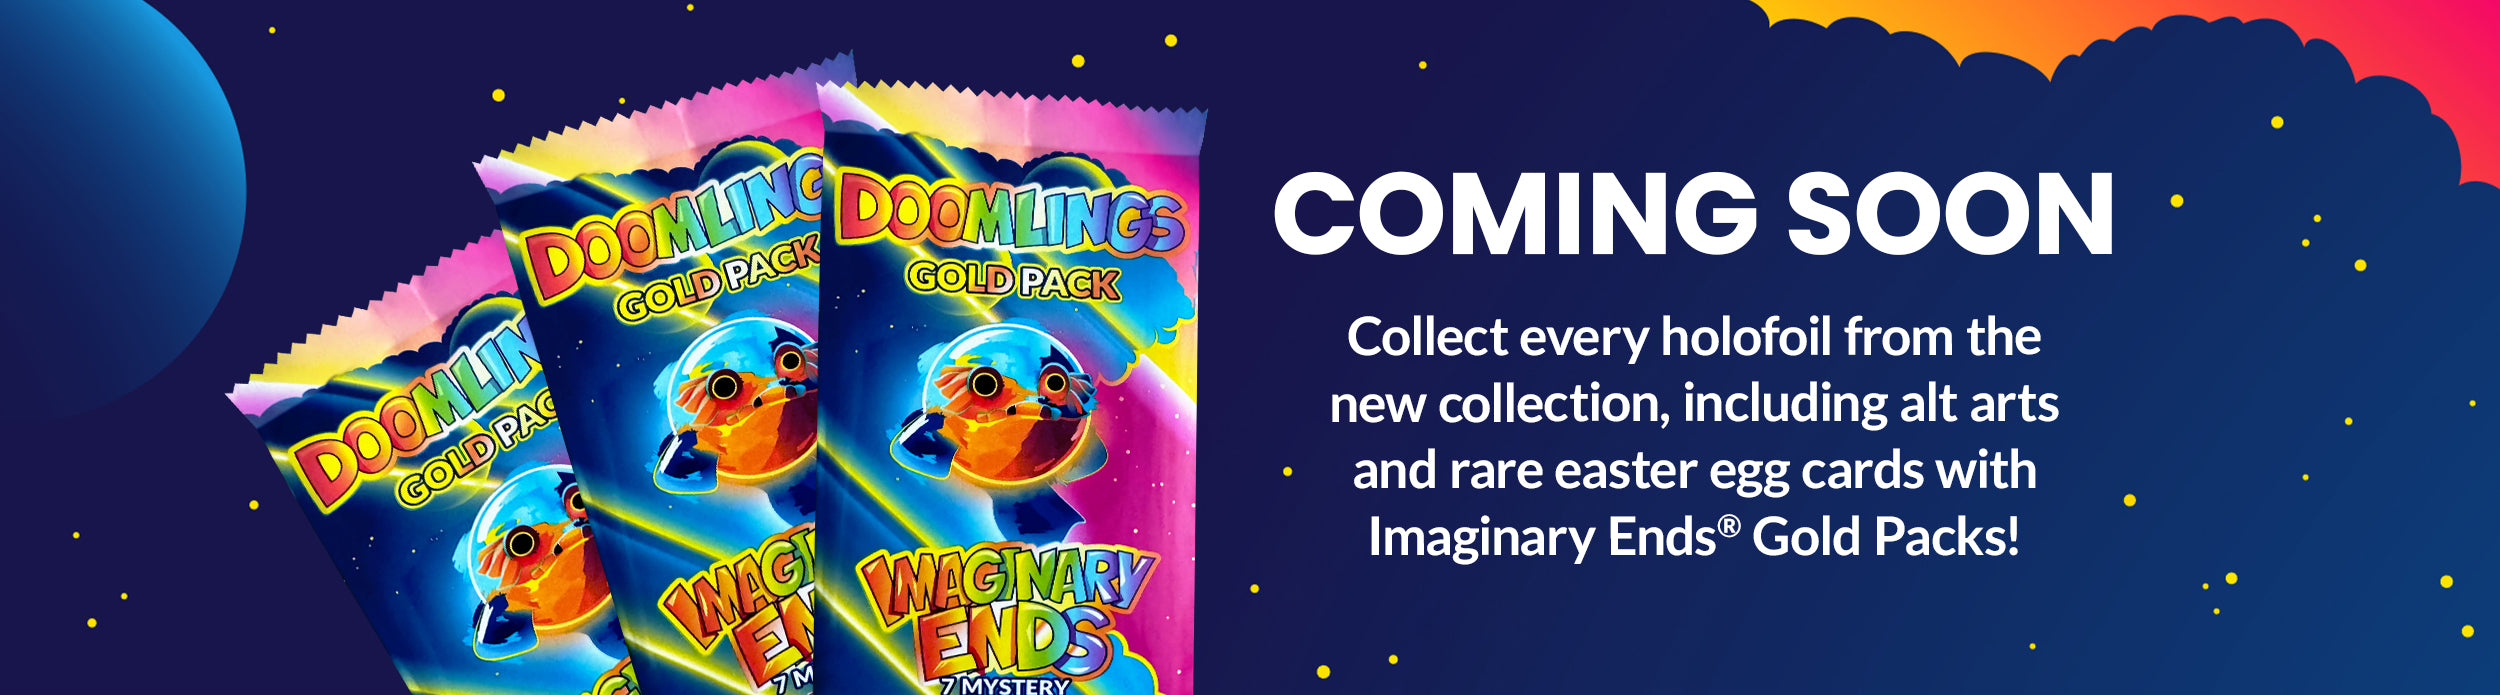 Coming Soon! Collect every Holofoil from the new collection, including alt arts and rare easter egg cards with Imaginary Ends Gold Packs. Image of three gold packs